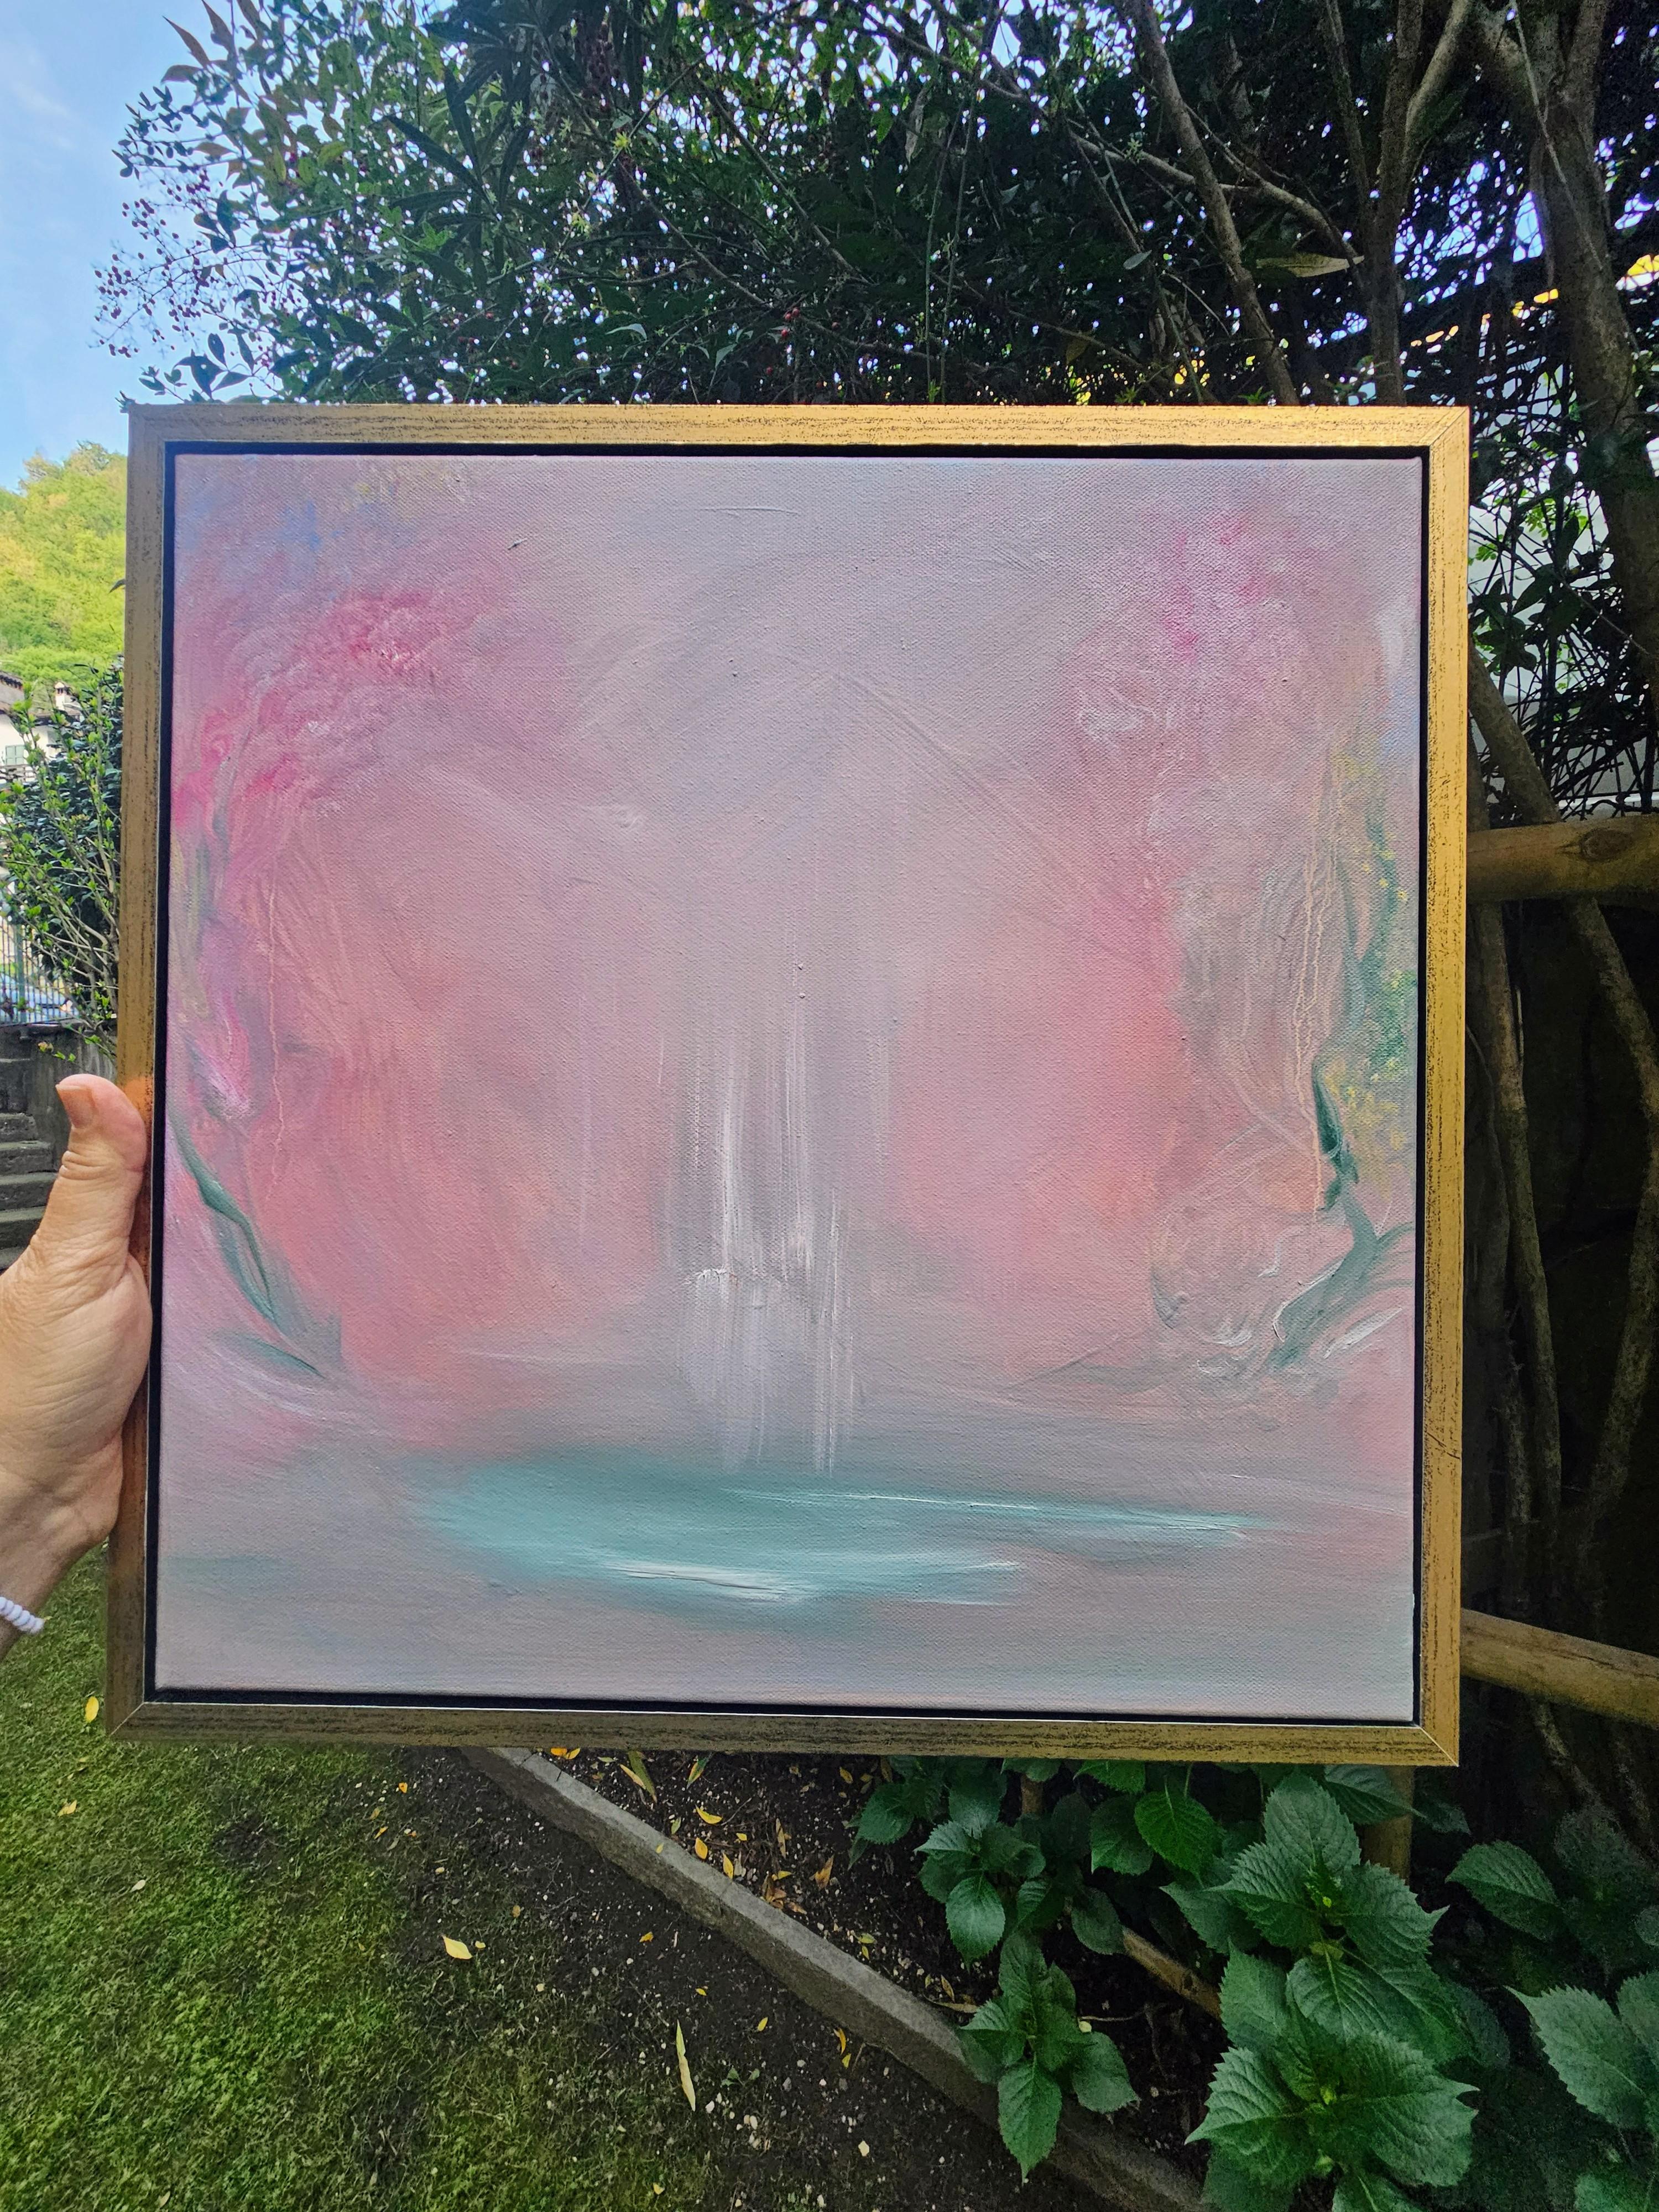 Water baby - Framed pink abstract floral nature painting - Painting by Jennifer L. Baker